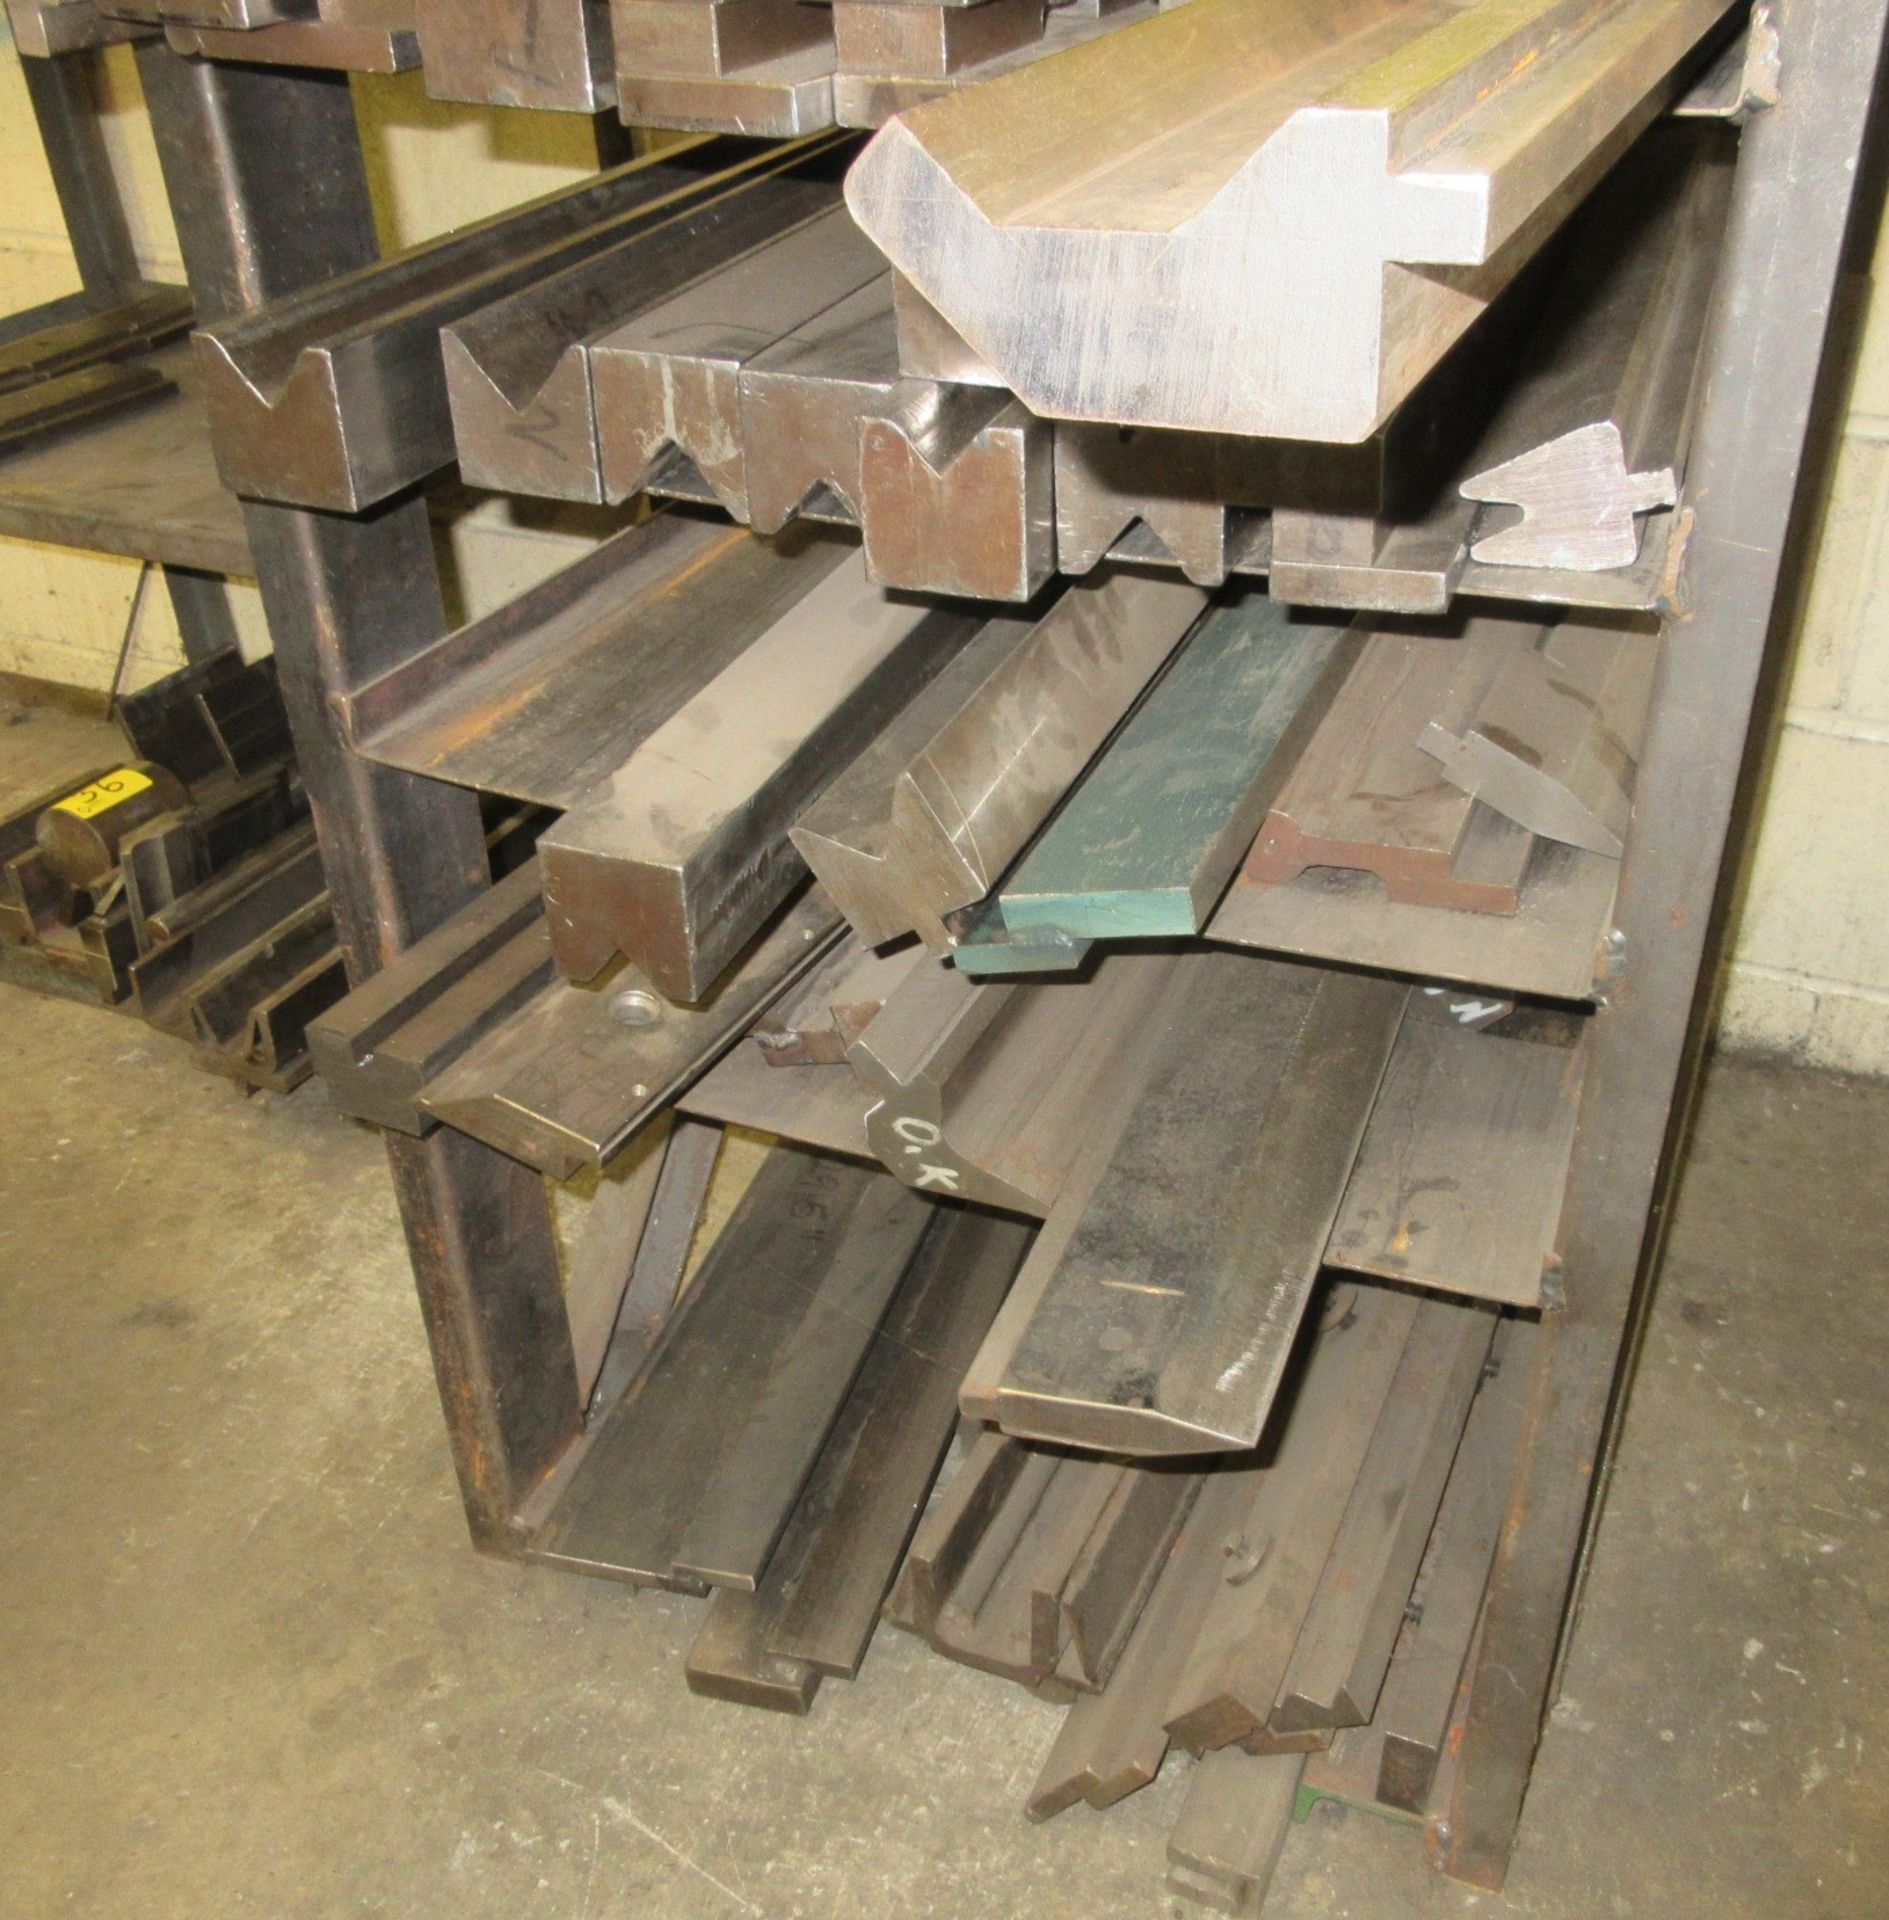 QTY. OF ASST. PRESS BRAKE DIES UP TO 45"L ON 8-LEVEL HEAVY DUTY STORAGE RACK - Image 5 of 6